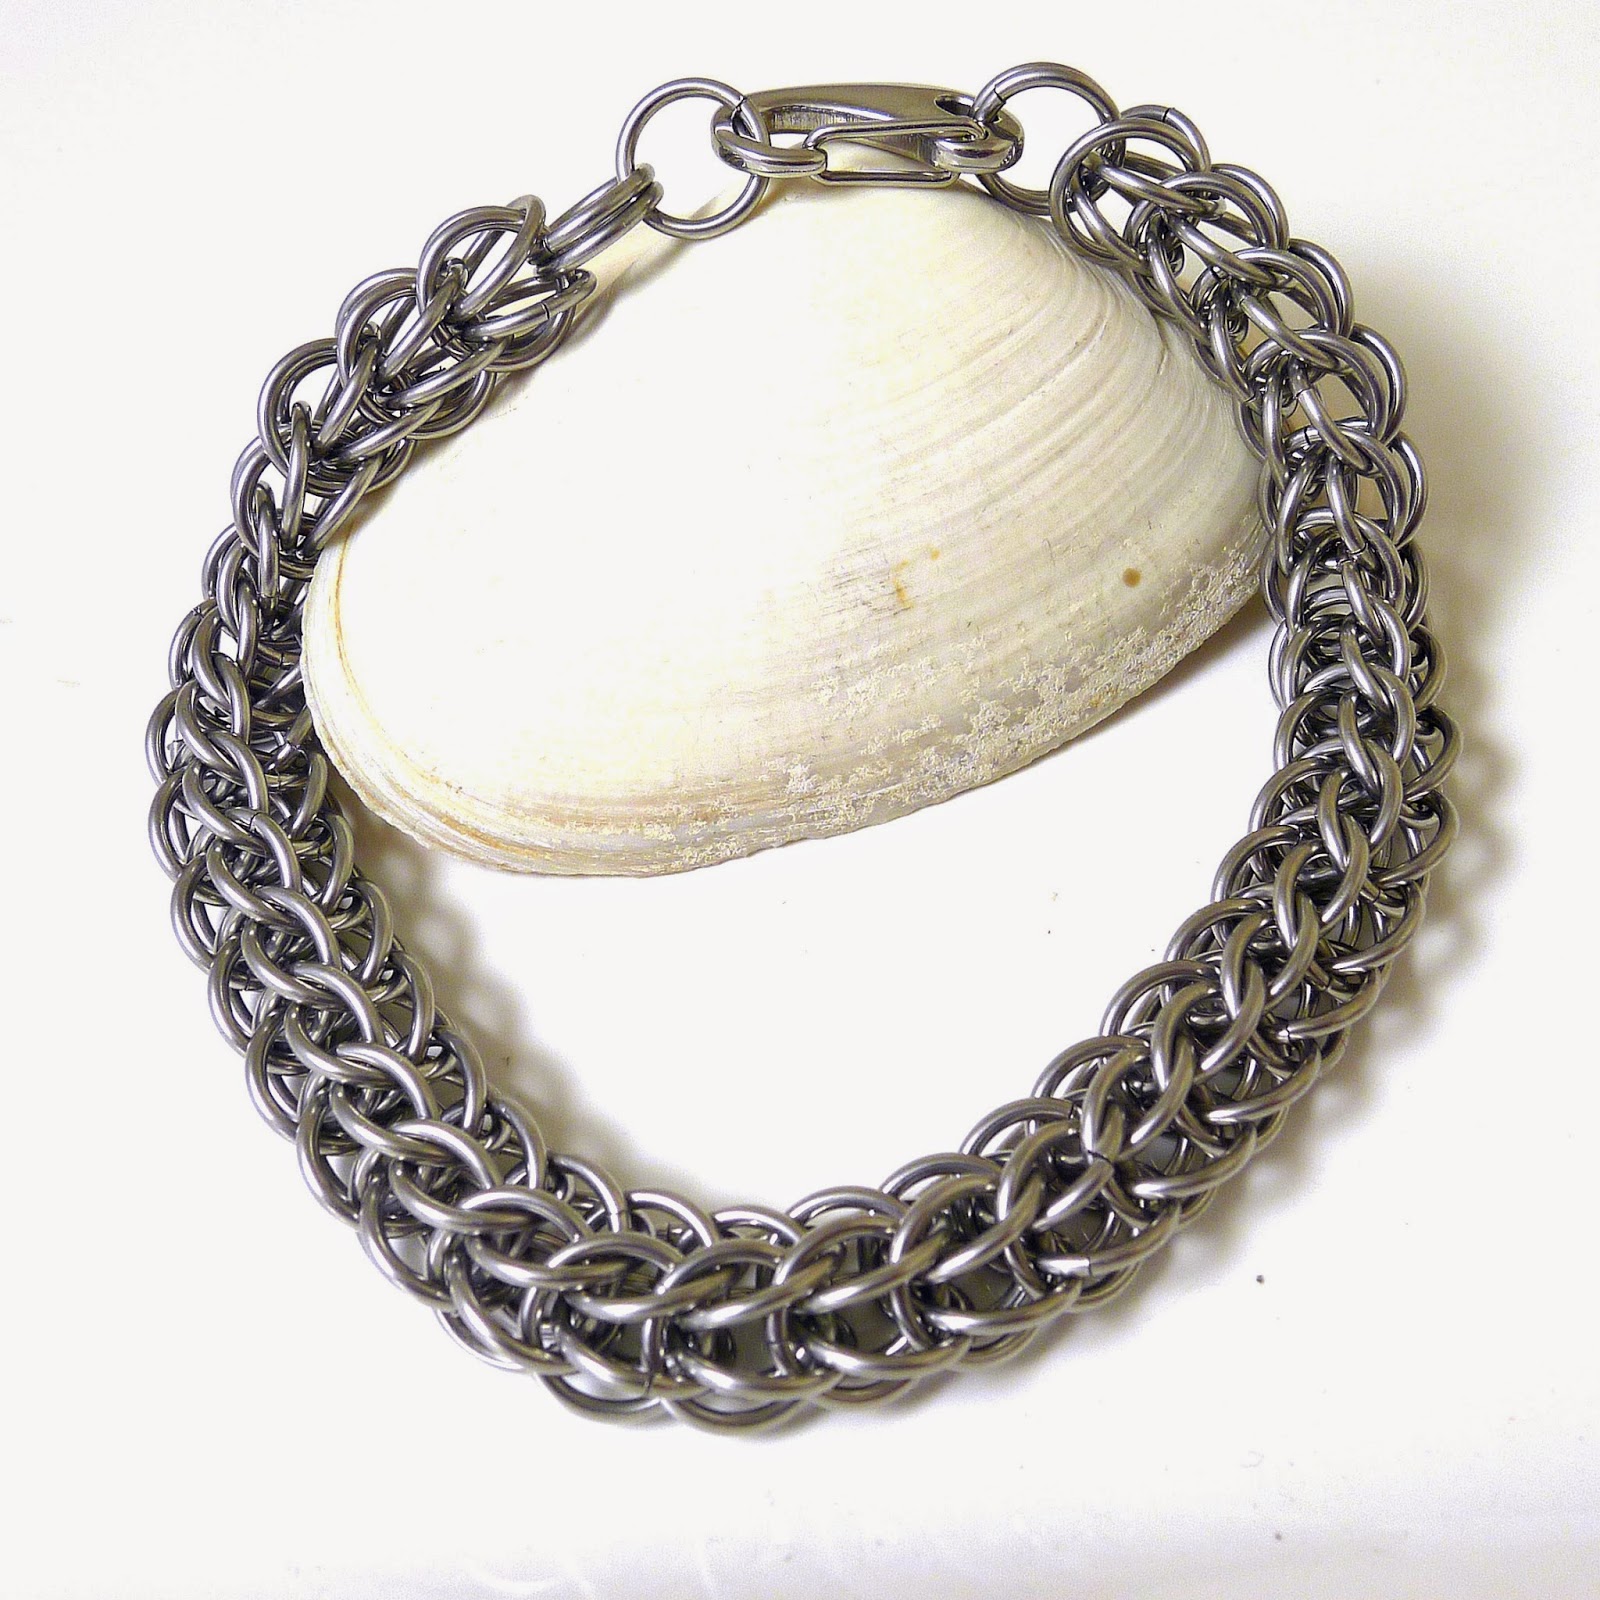 http://www.shazzabethcreations.co.nz/#!product/prd1/2699259551/men%27s-stainless-steel-persian-chainmaille-bracelet